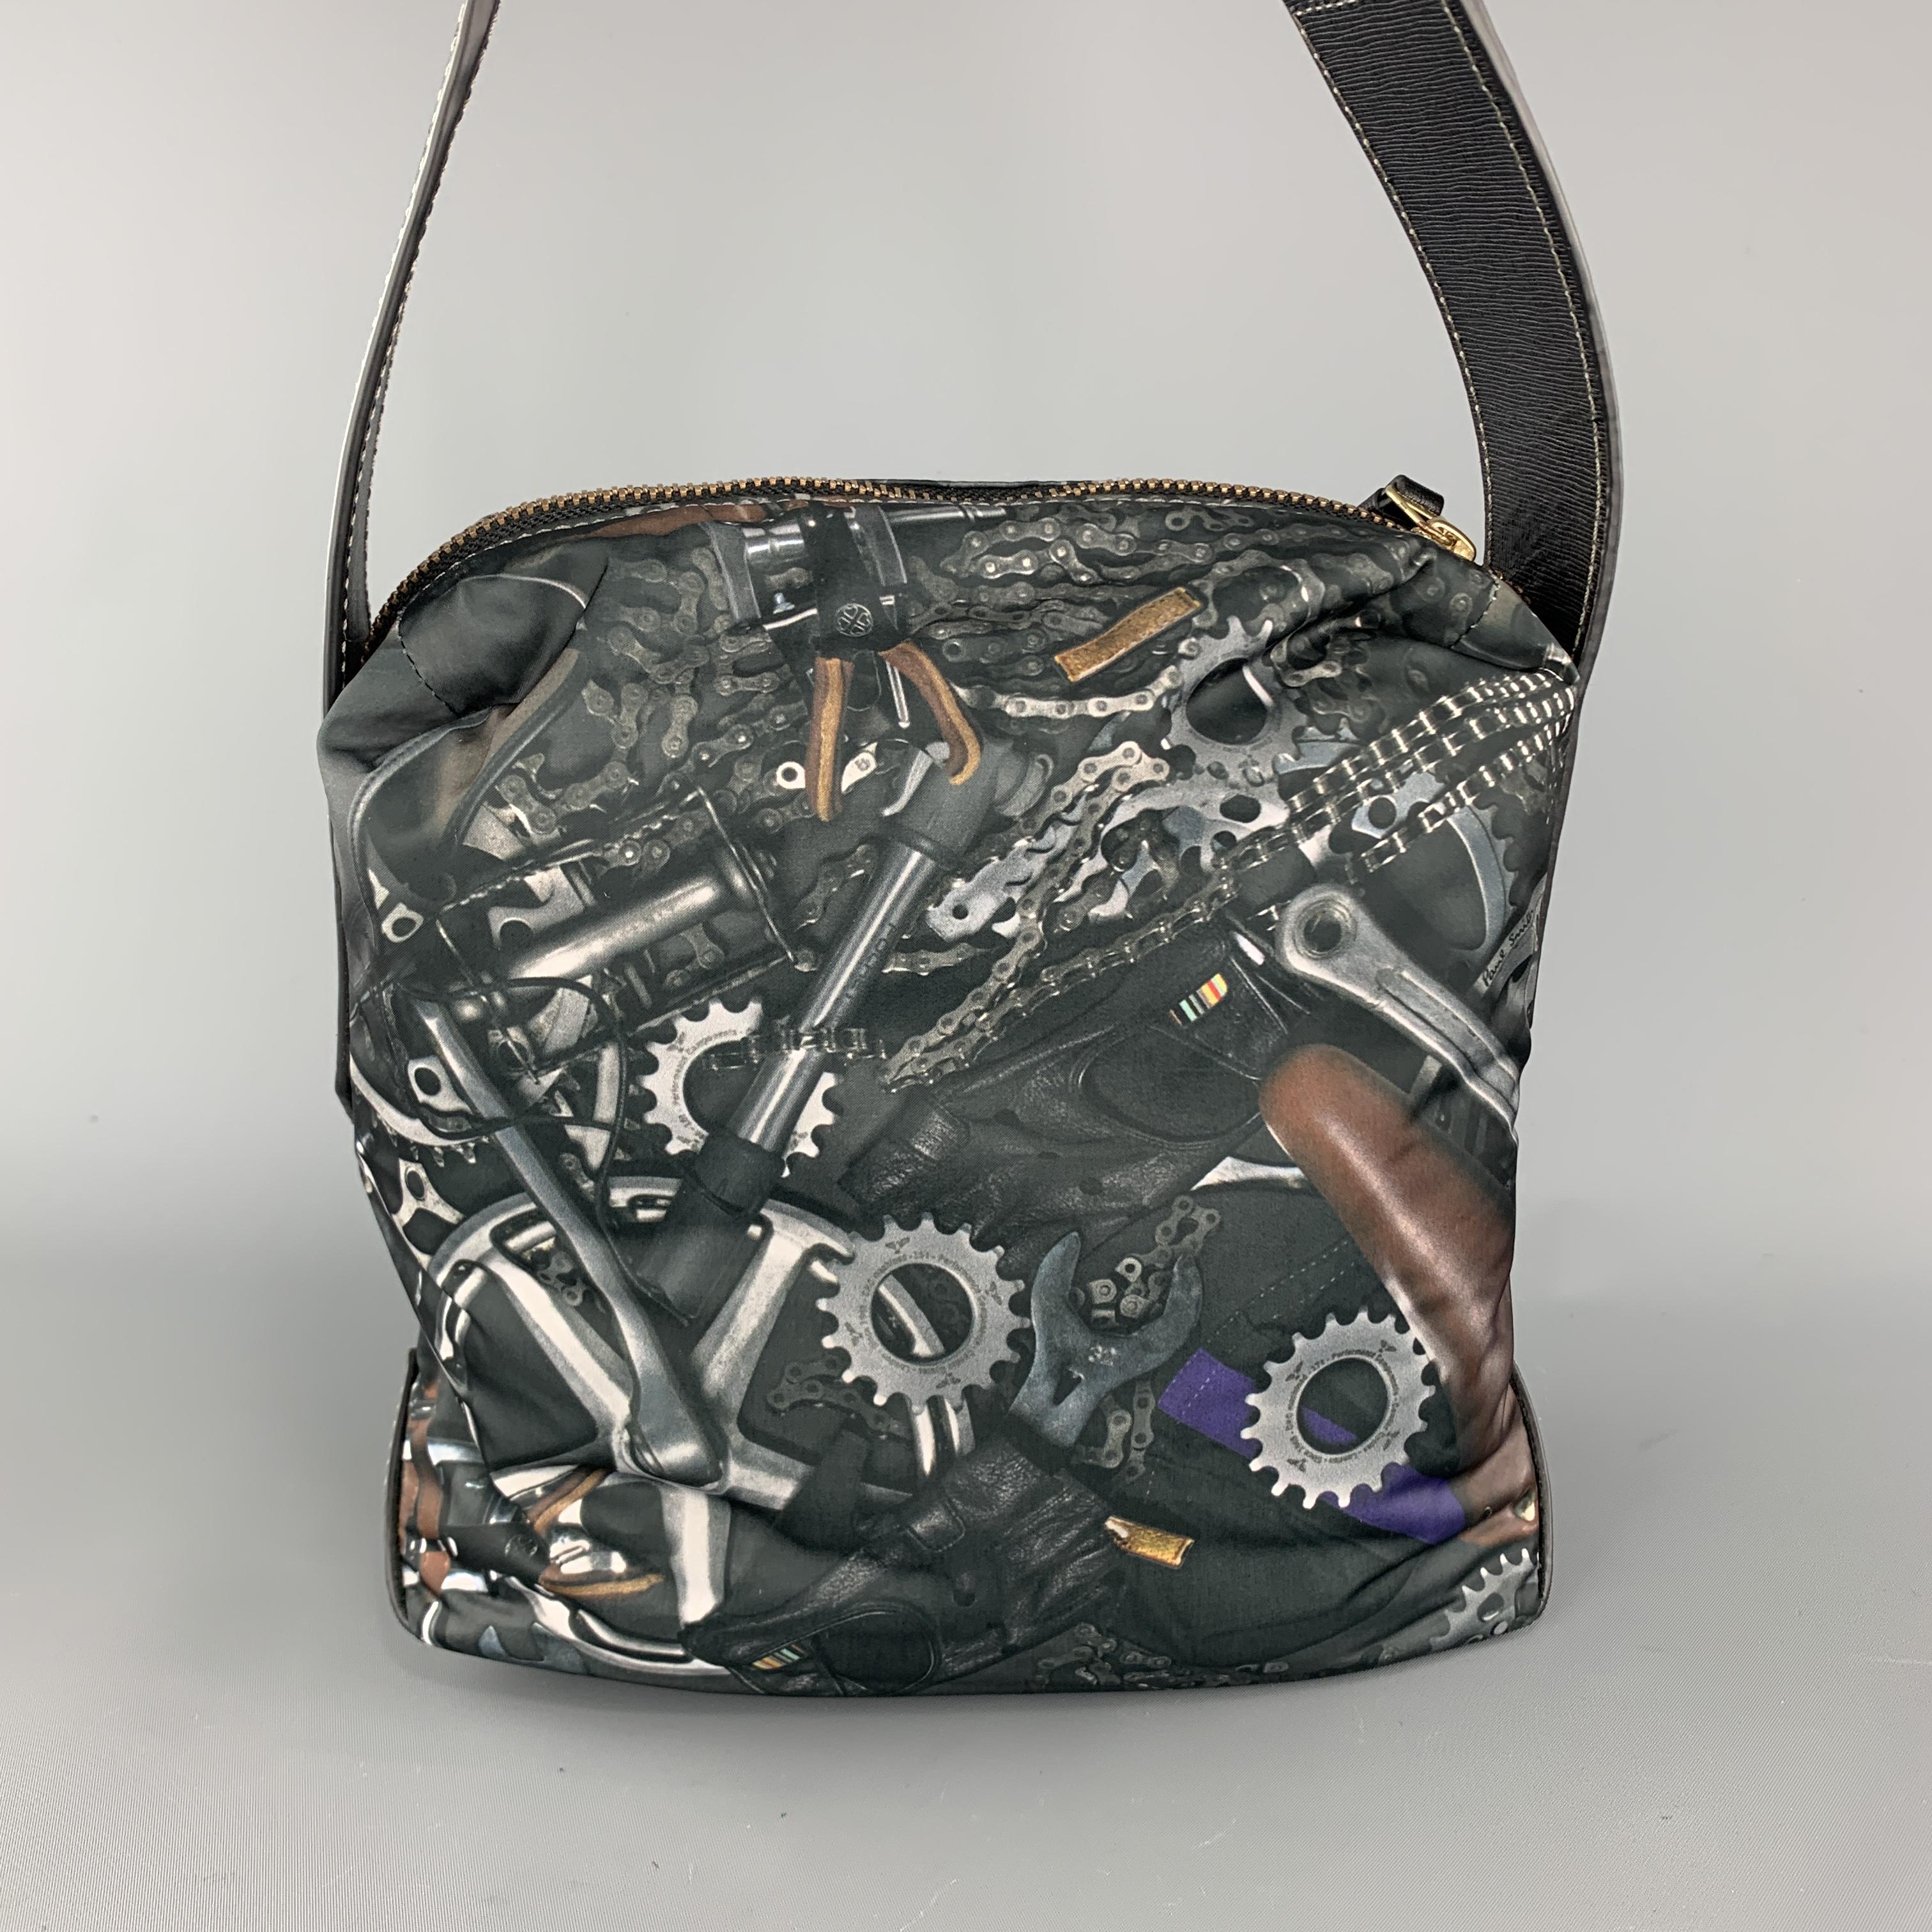 PAUL SMITH bag comes in slate gray tools print nylon with a top zip, textured leather details, and adjustable canvas crossbody strap. 

Excellent Pre-Owned Condition.

Measurements:

Length: 10 in.
Width: 5 in.
Height: 10 in.
Drop: 25 in.